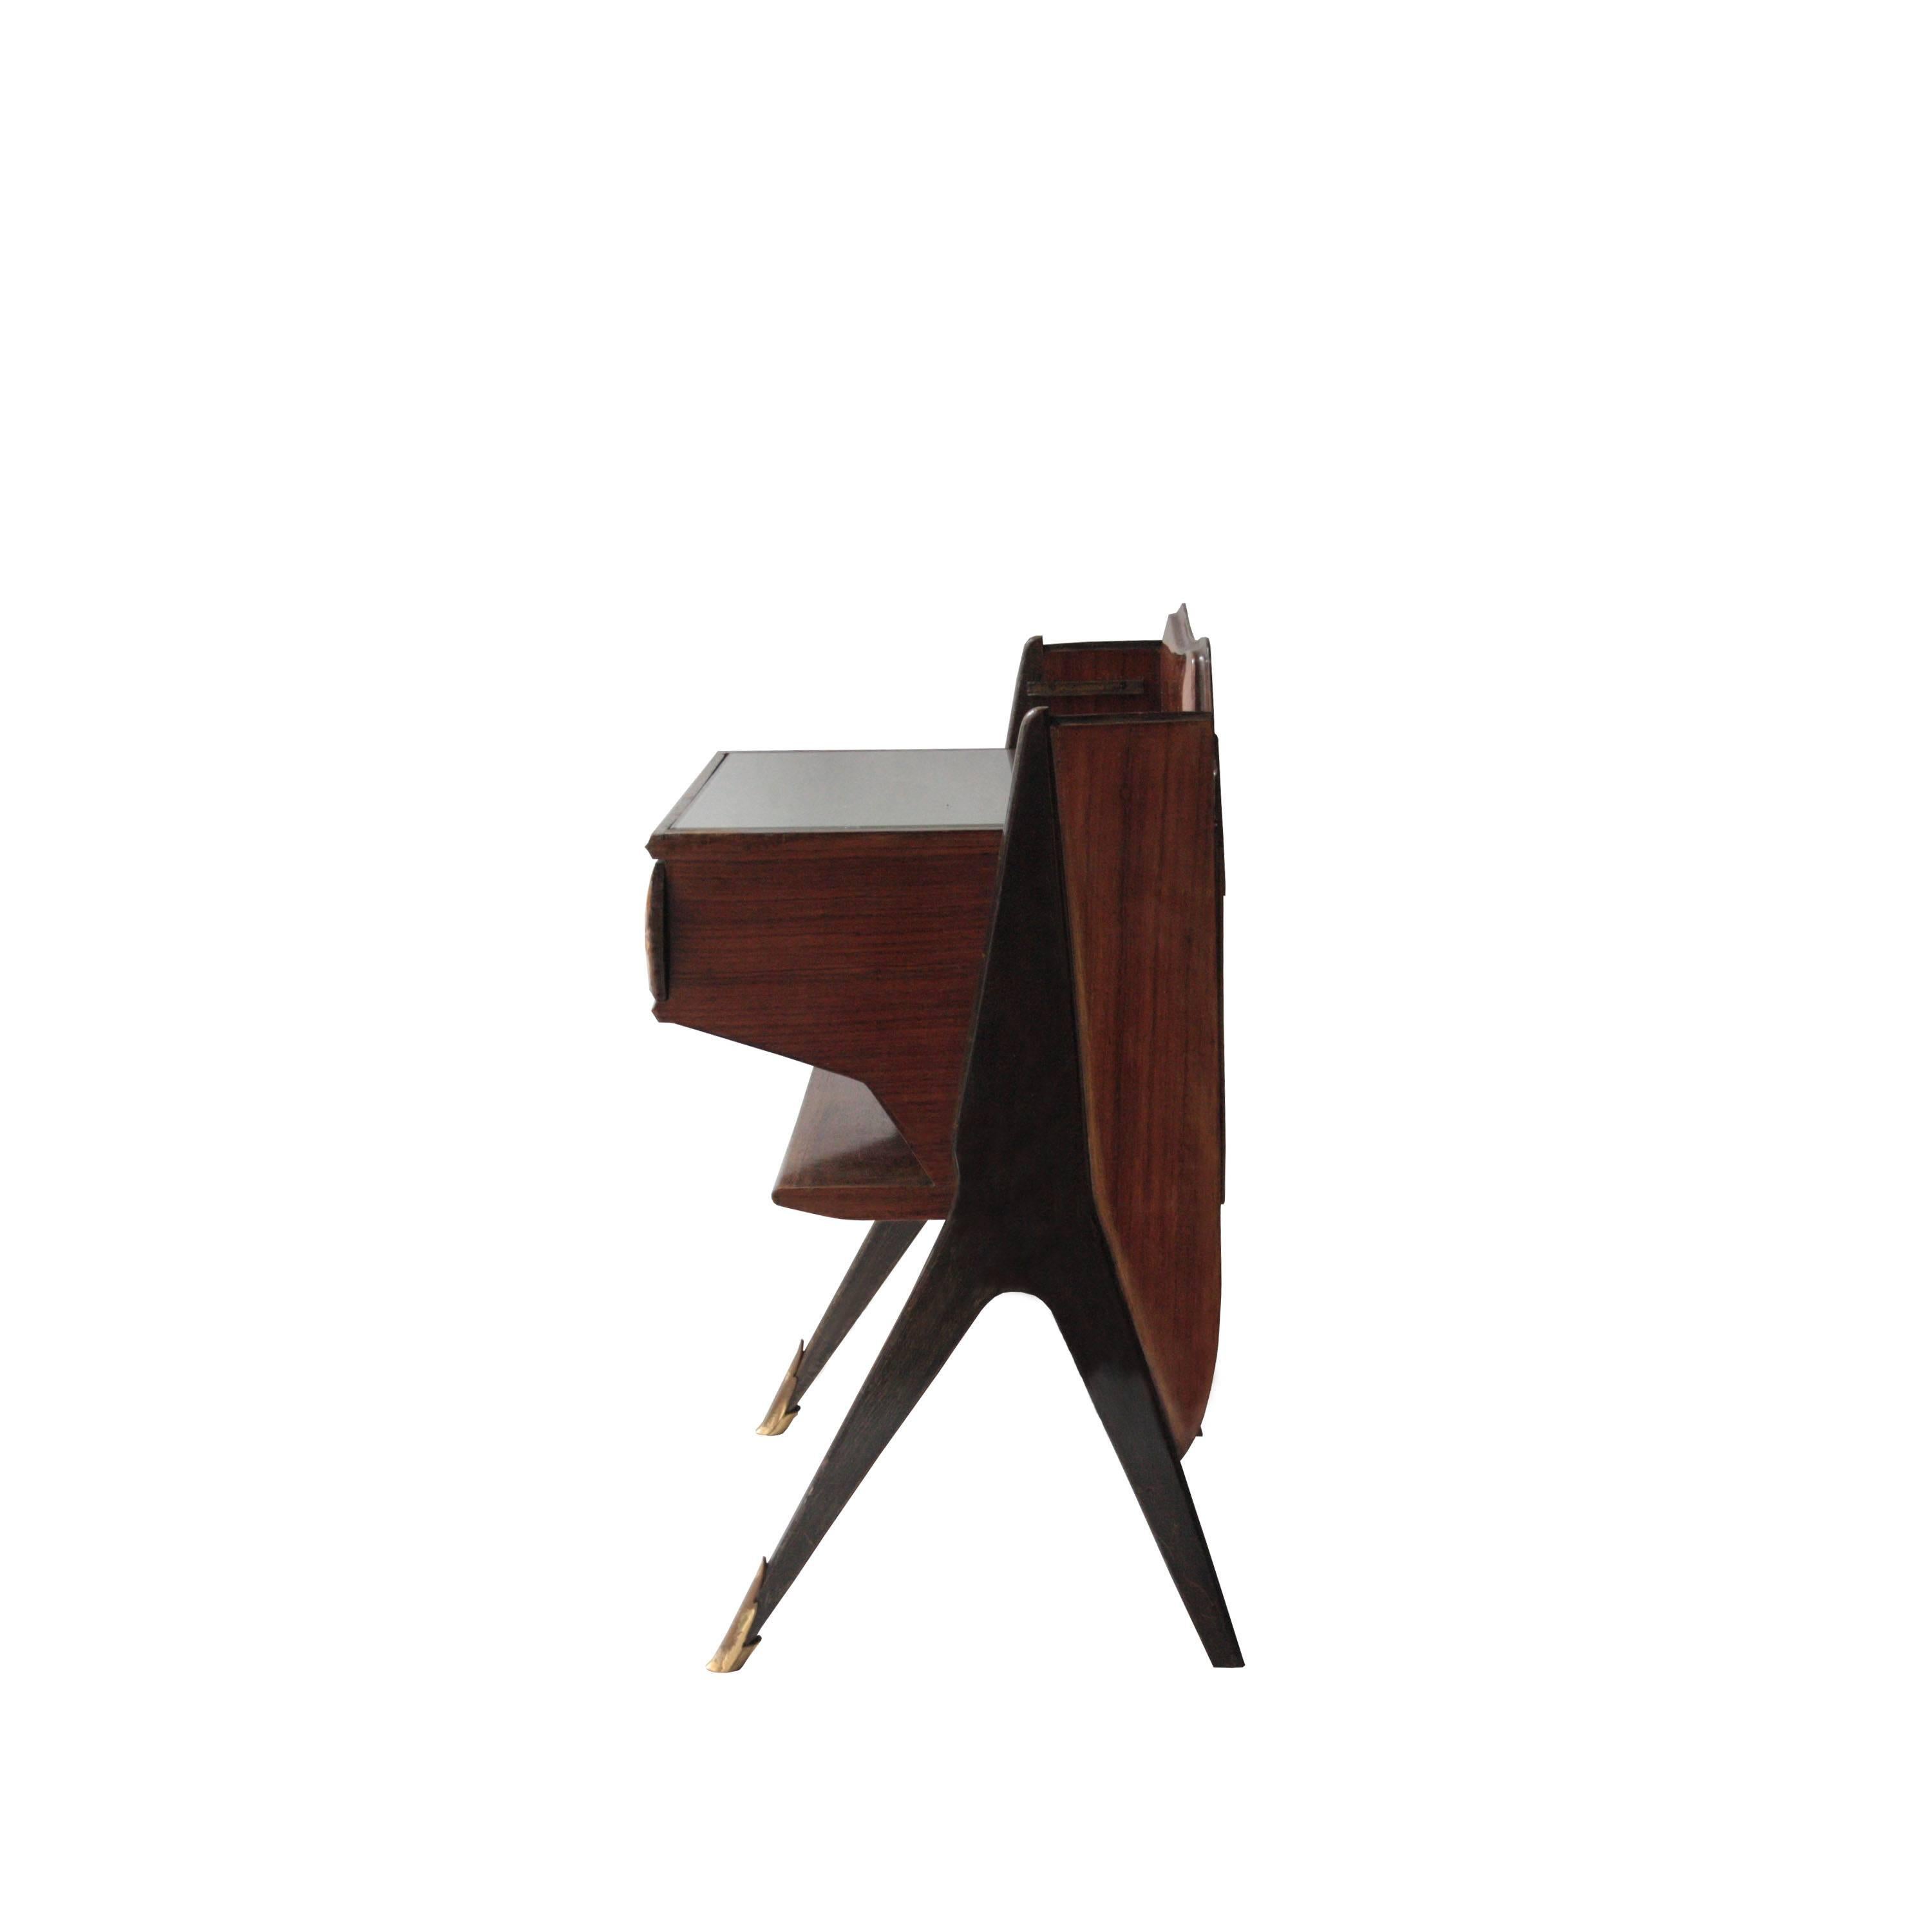 Italian Pair of Bedside Tables in Rosewood Wood, Italy, 1950